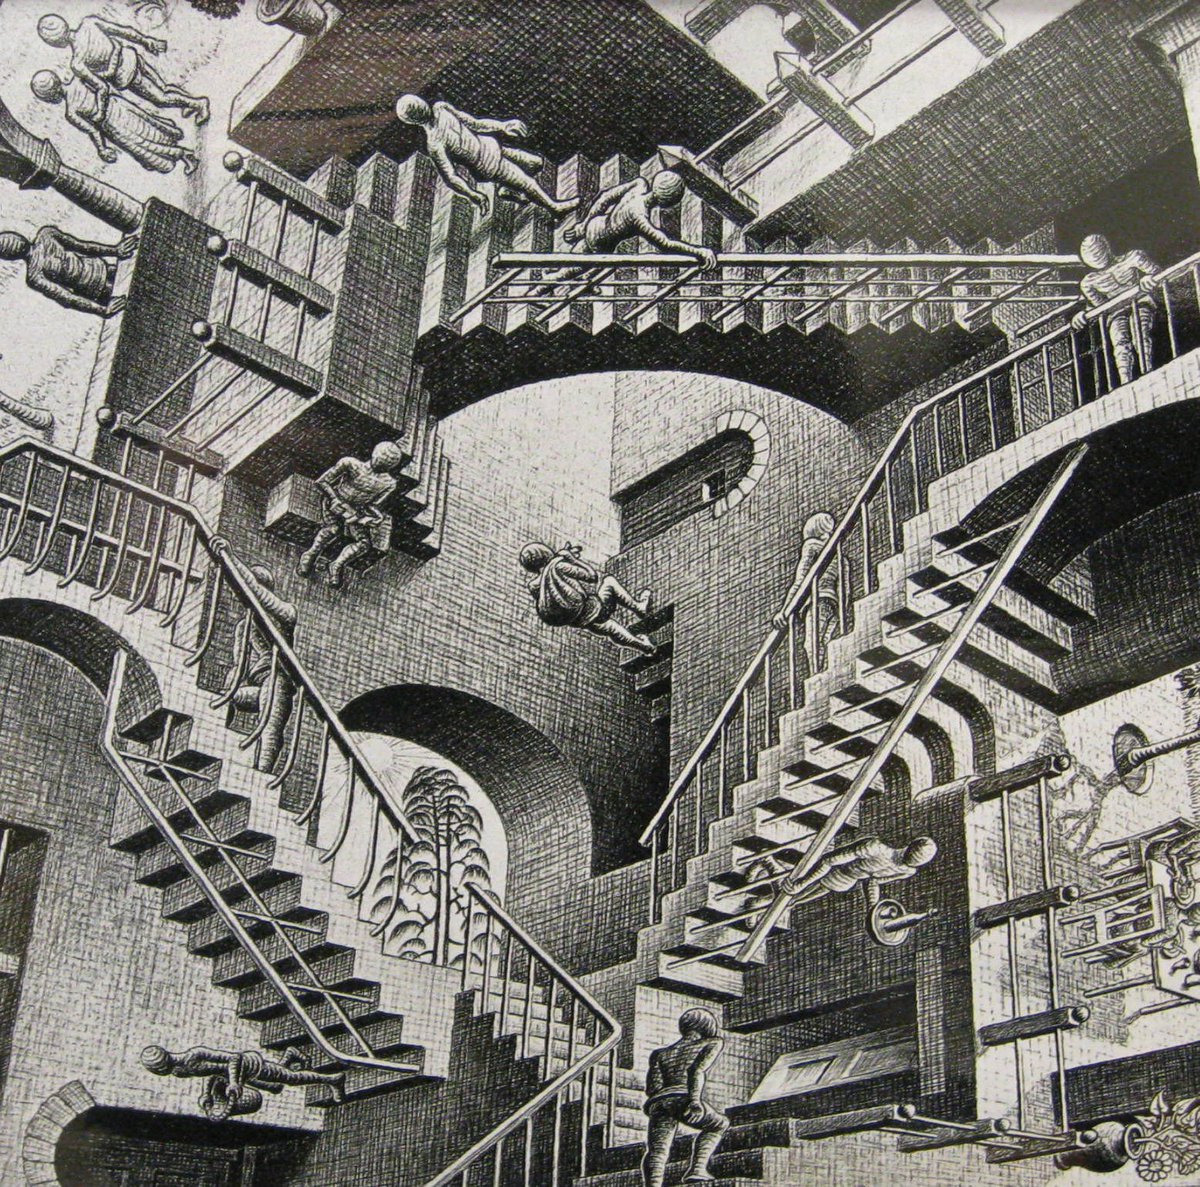 Accidentally bumped into this in an art gallery, and it went blank. Turns out it was an Escher sketch.

#lunchpun #ratemypun